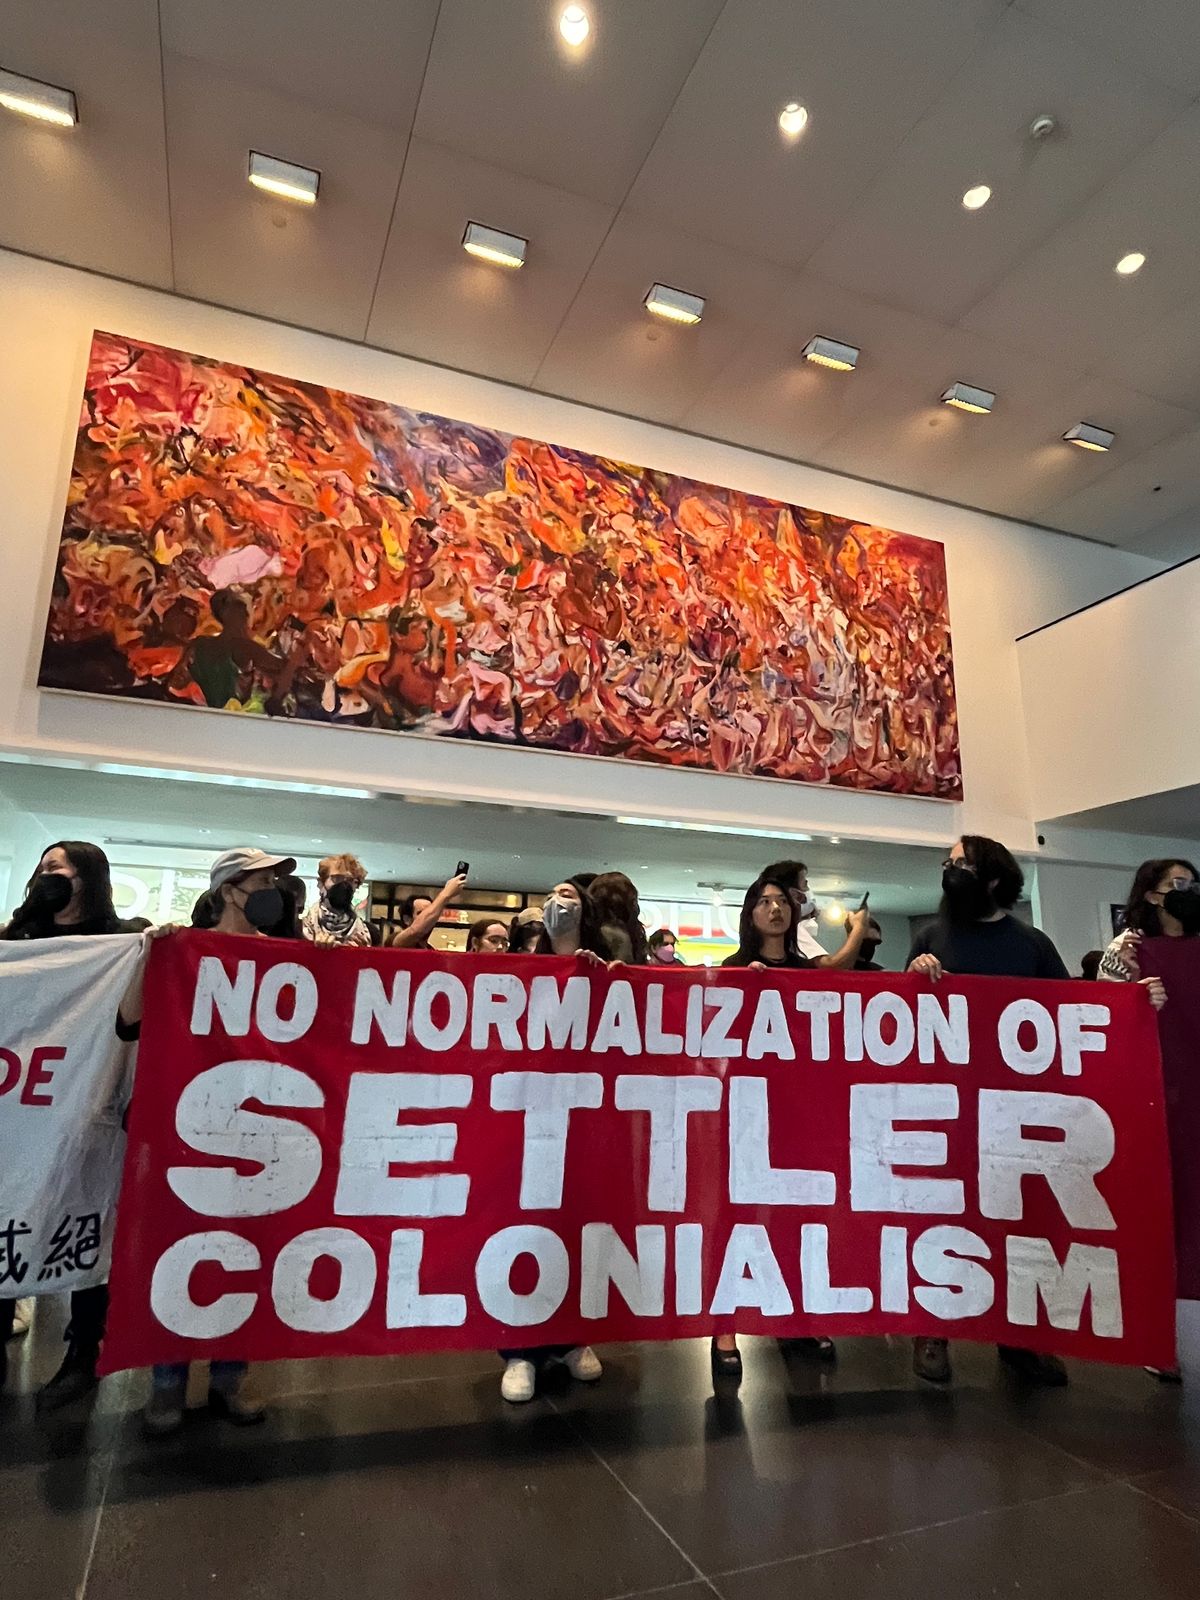 Protesters carry a banner beneath a Cecily Brown painting in the lobby of the Brooklyn Museum on 31 May Photo by Gwendolen Cates